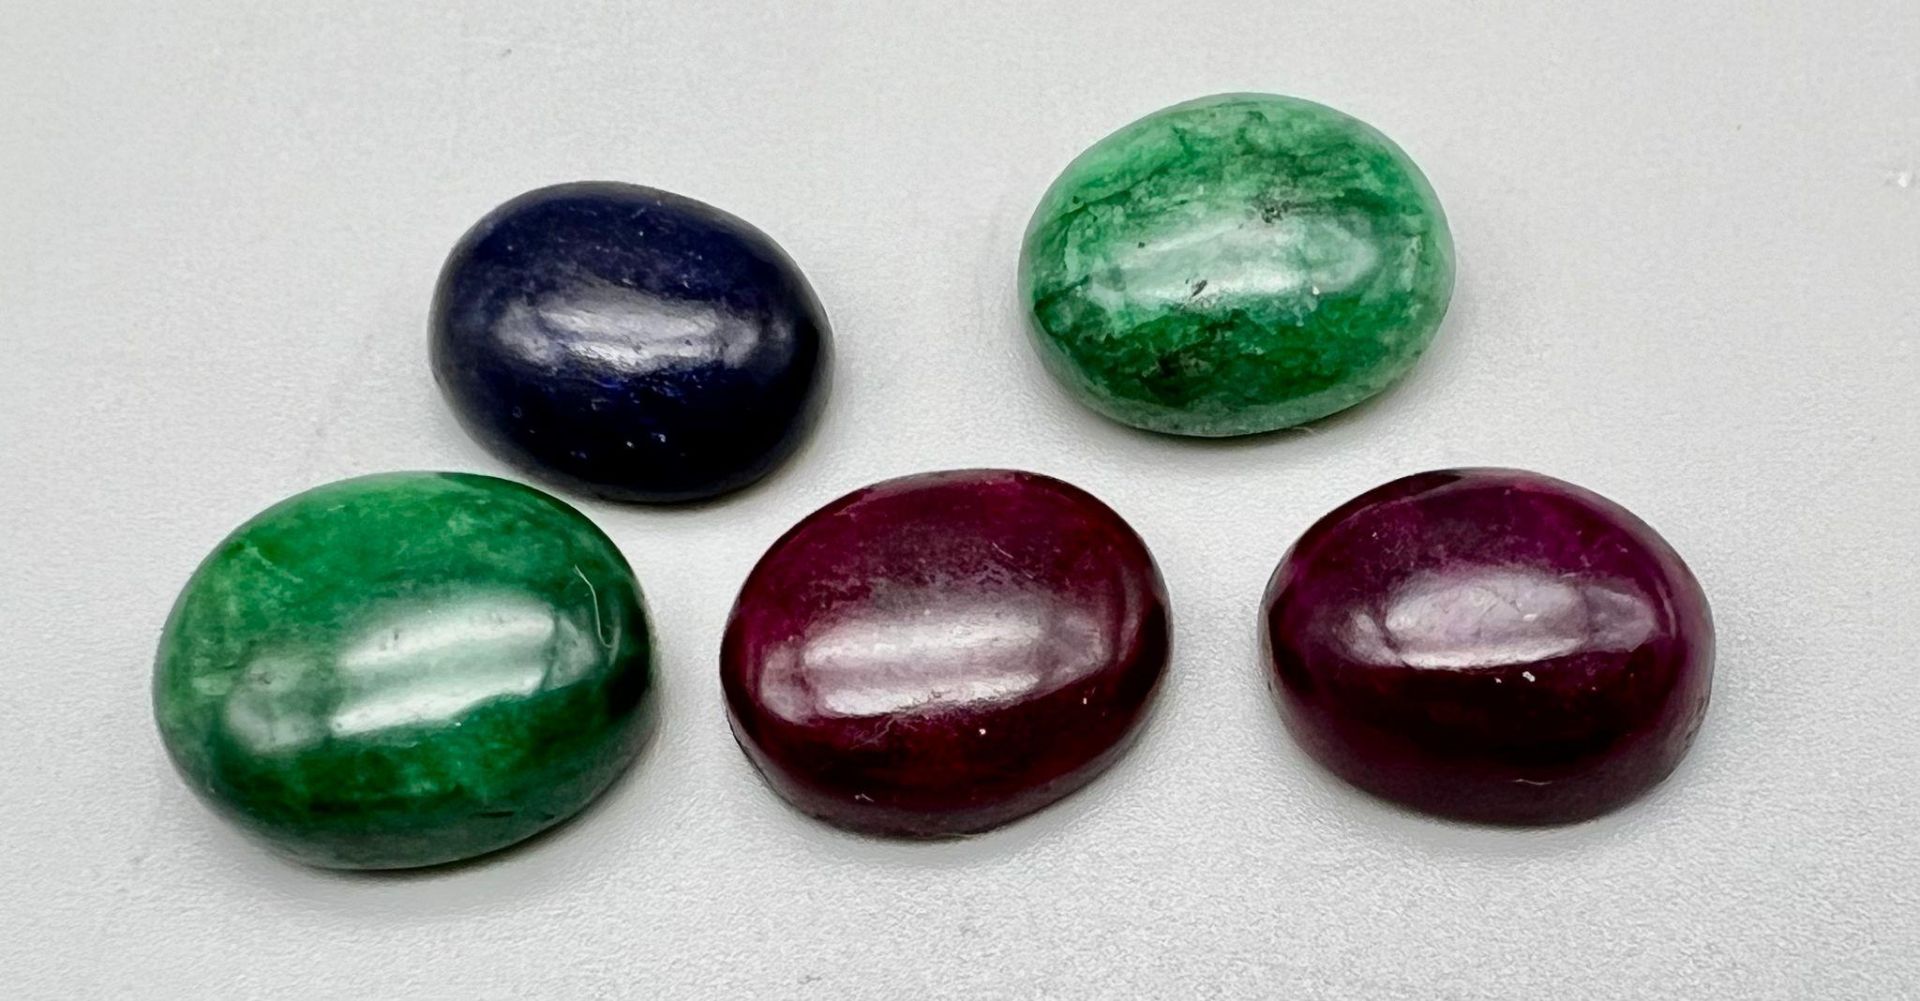 84.20 Ct mixed lot of 1 Cabochon Ruby, 2 Emerald & 2 Blue Sapphire Gemstones , GLI Certified - Image 2 of 3